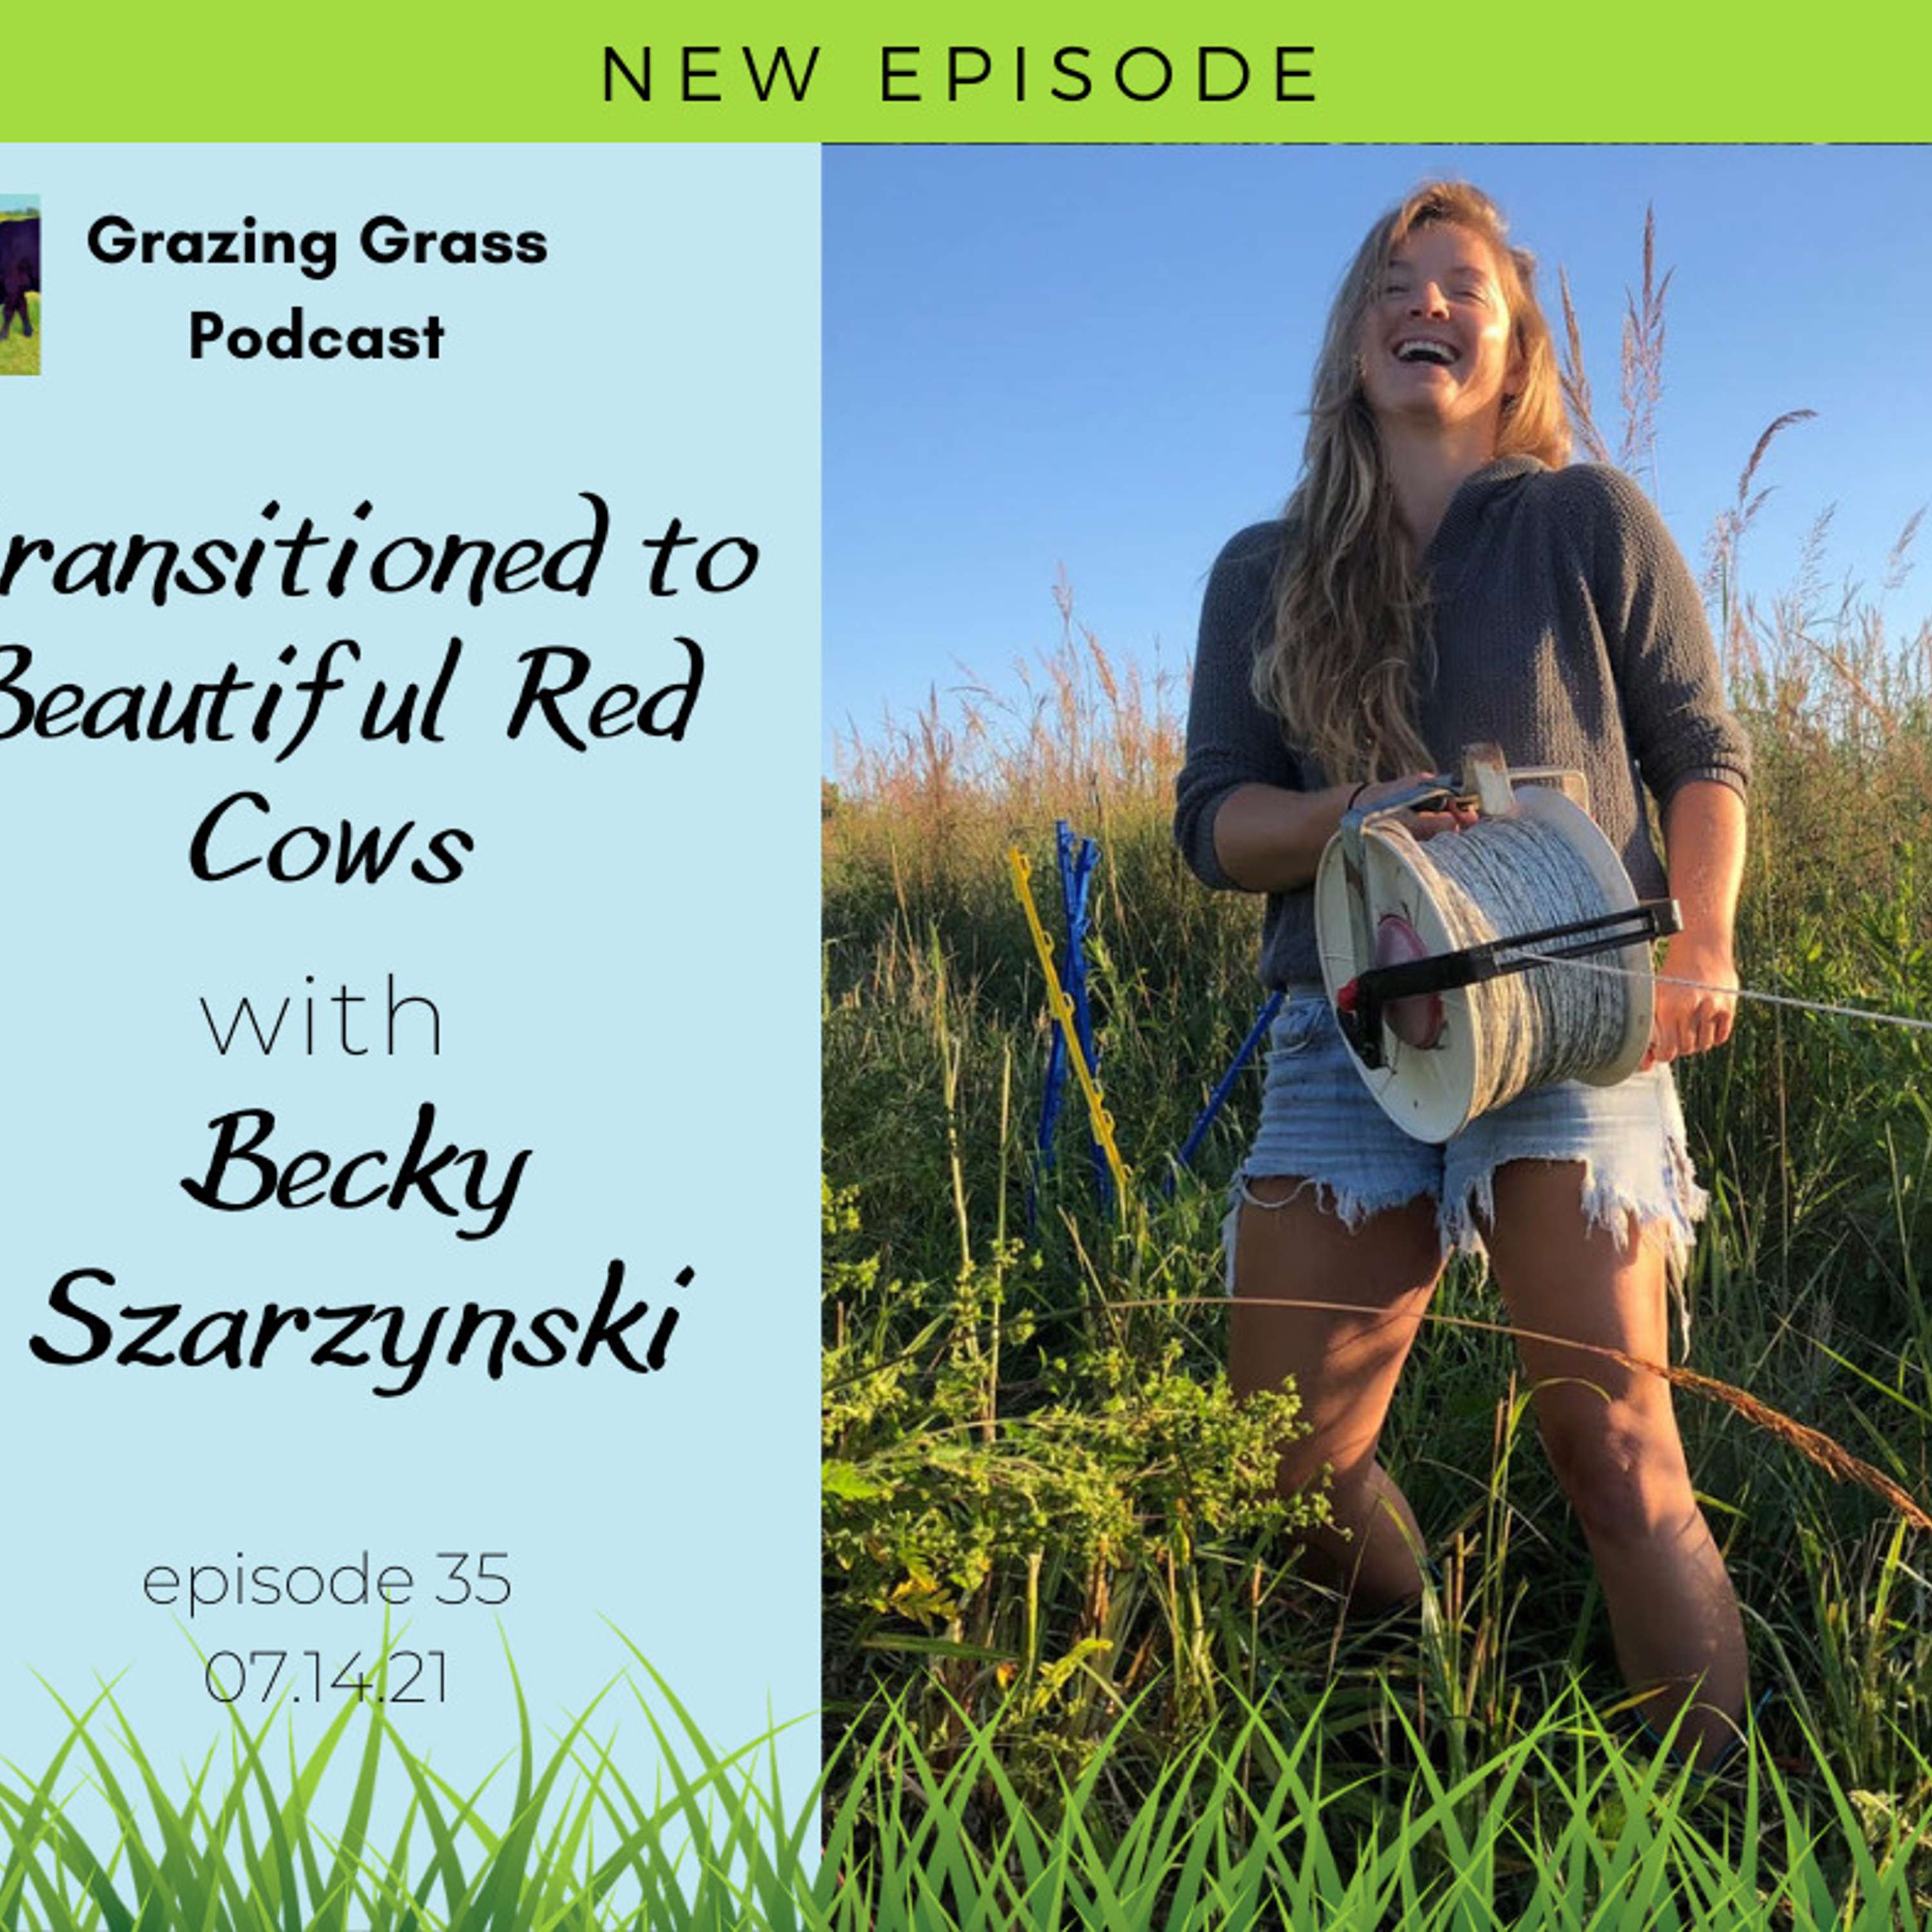 e35. Becky Szarzynski - Transitioned to Beautiful Red Cows